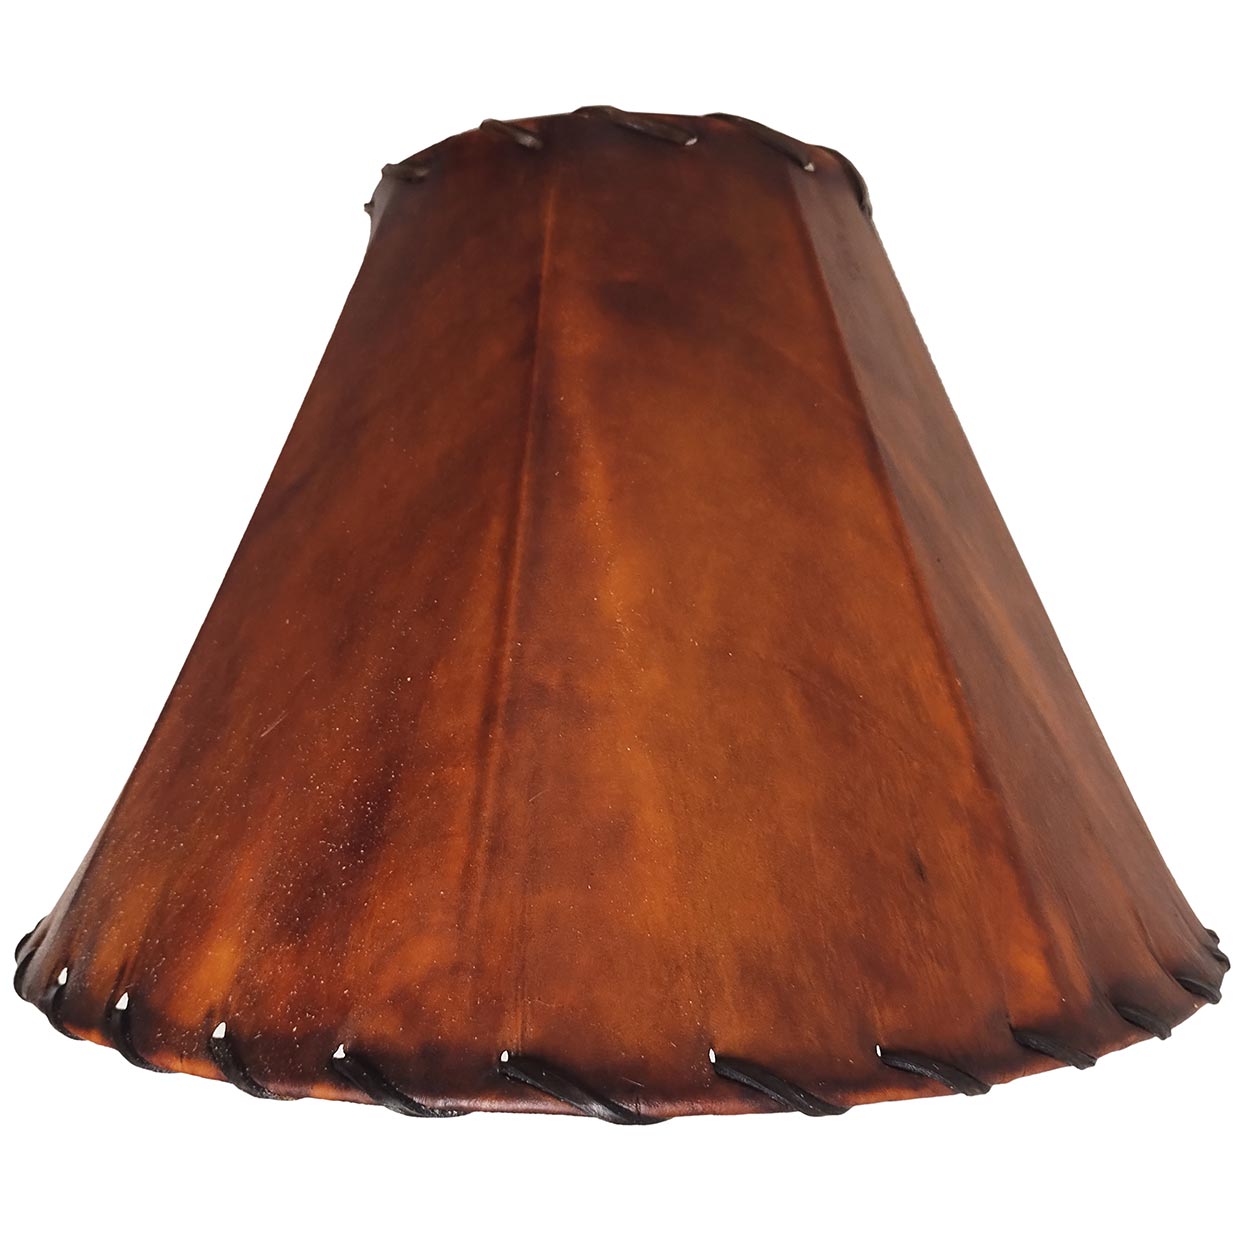 183045 - 16in H x 10in W Deluxe Genuine Rawhide Lampshade